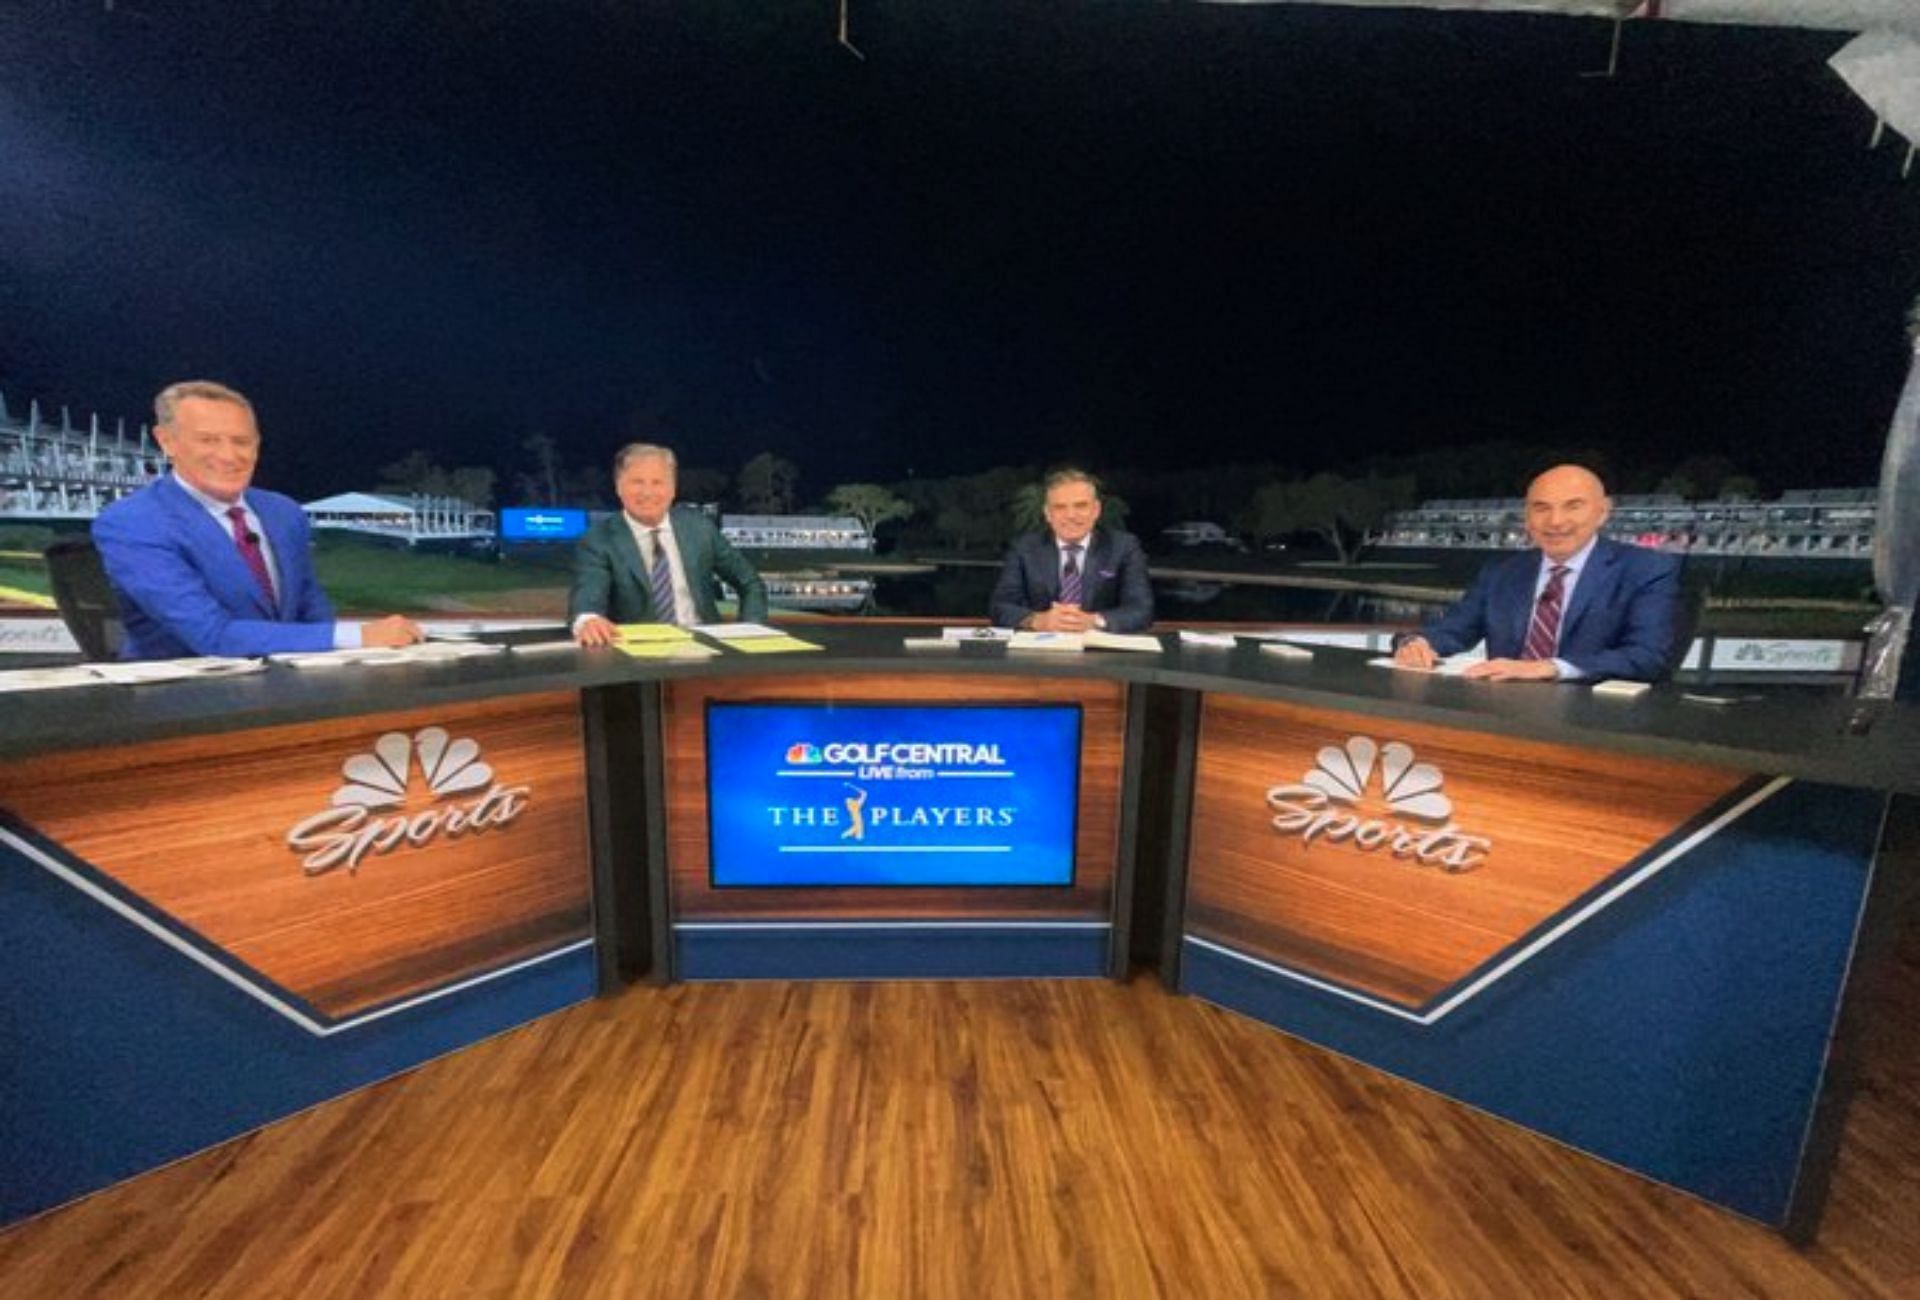 Paul McGinley (second from the right) working for Golf Channel (Image via X @mcginleygolf).